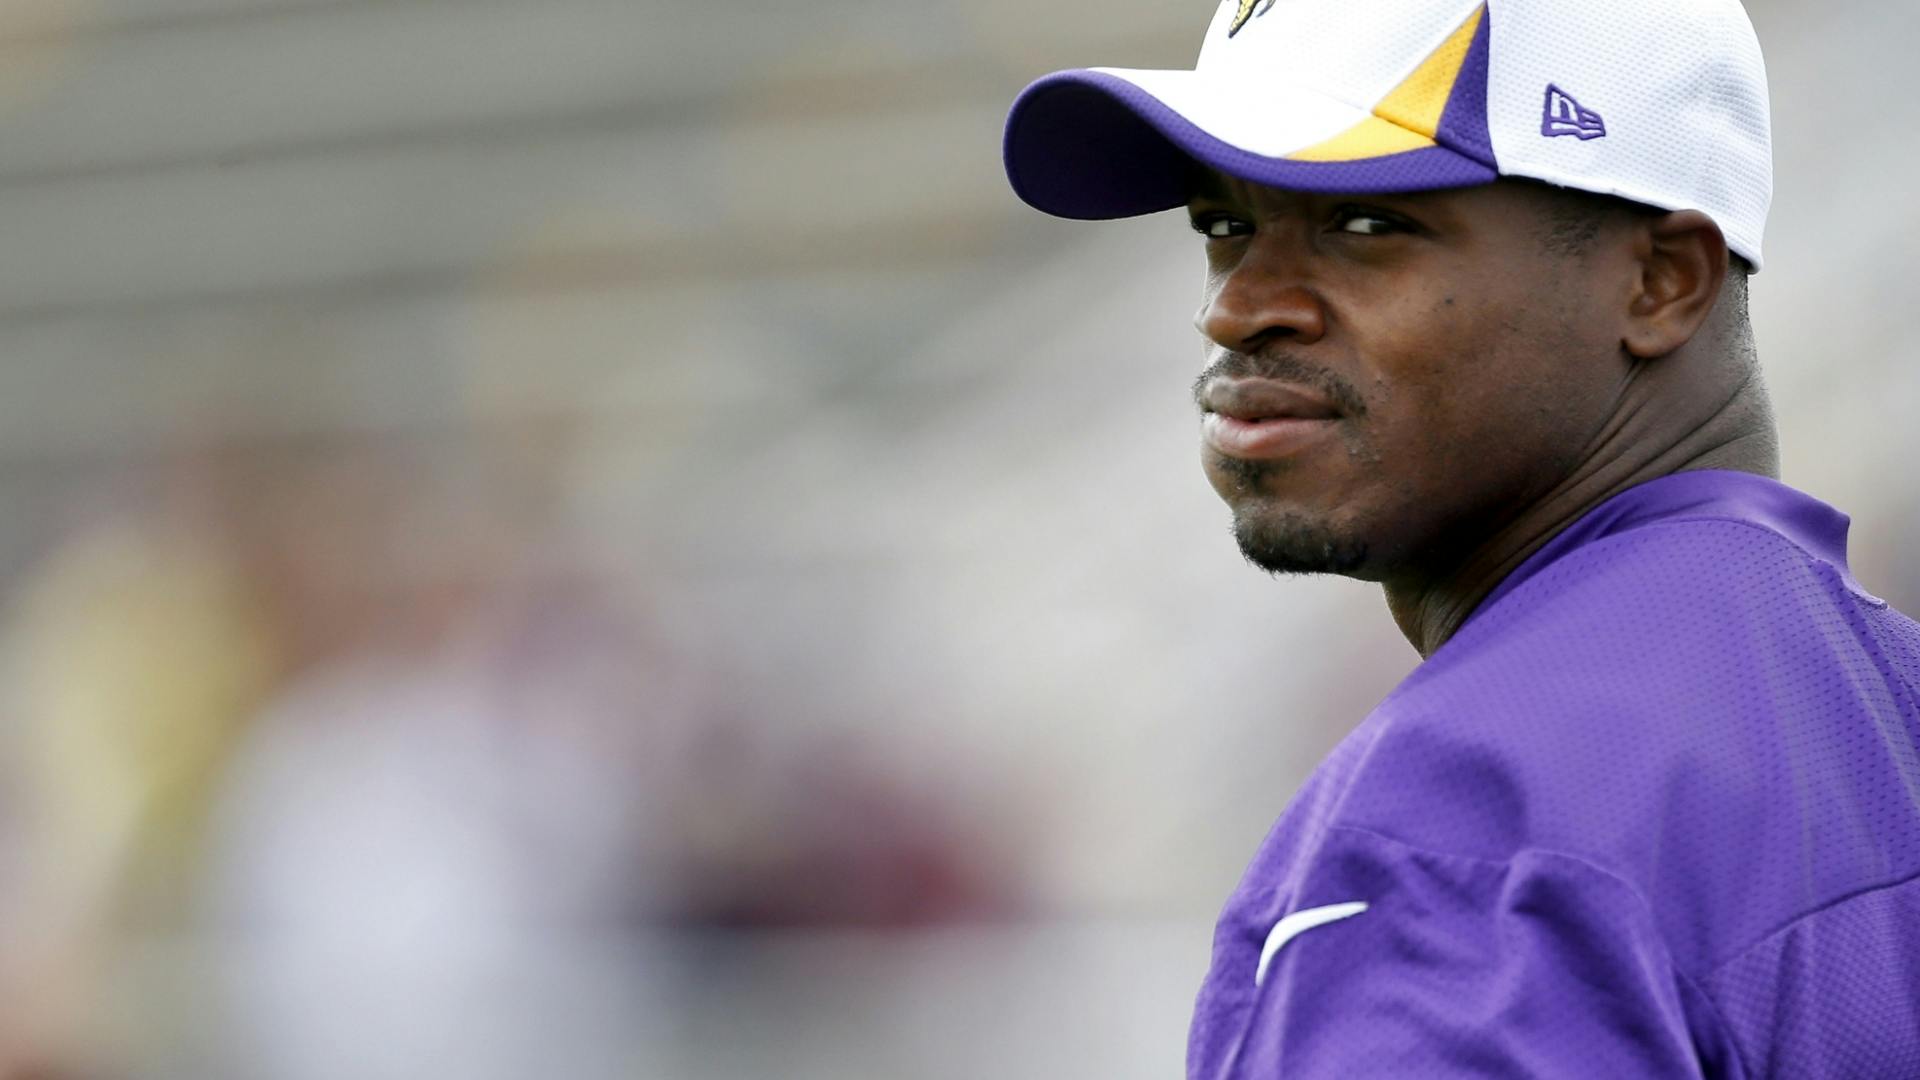 Vikings running back Adrian Peterson said he is looking forward to HGH testing in the NFL. "I can't wait until they draw my blood," he said.